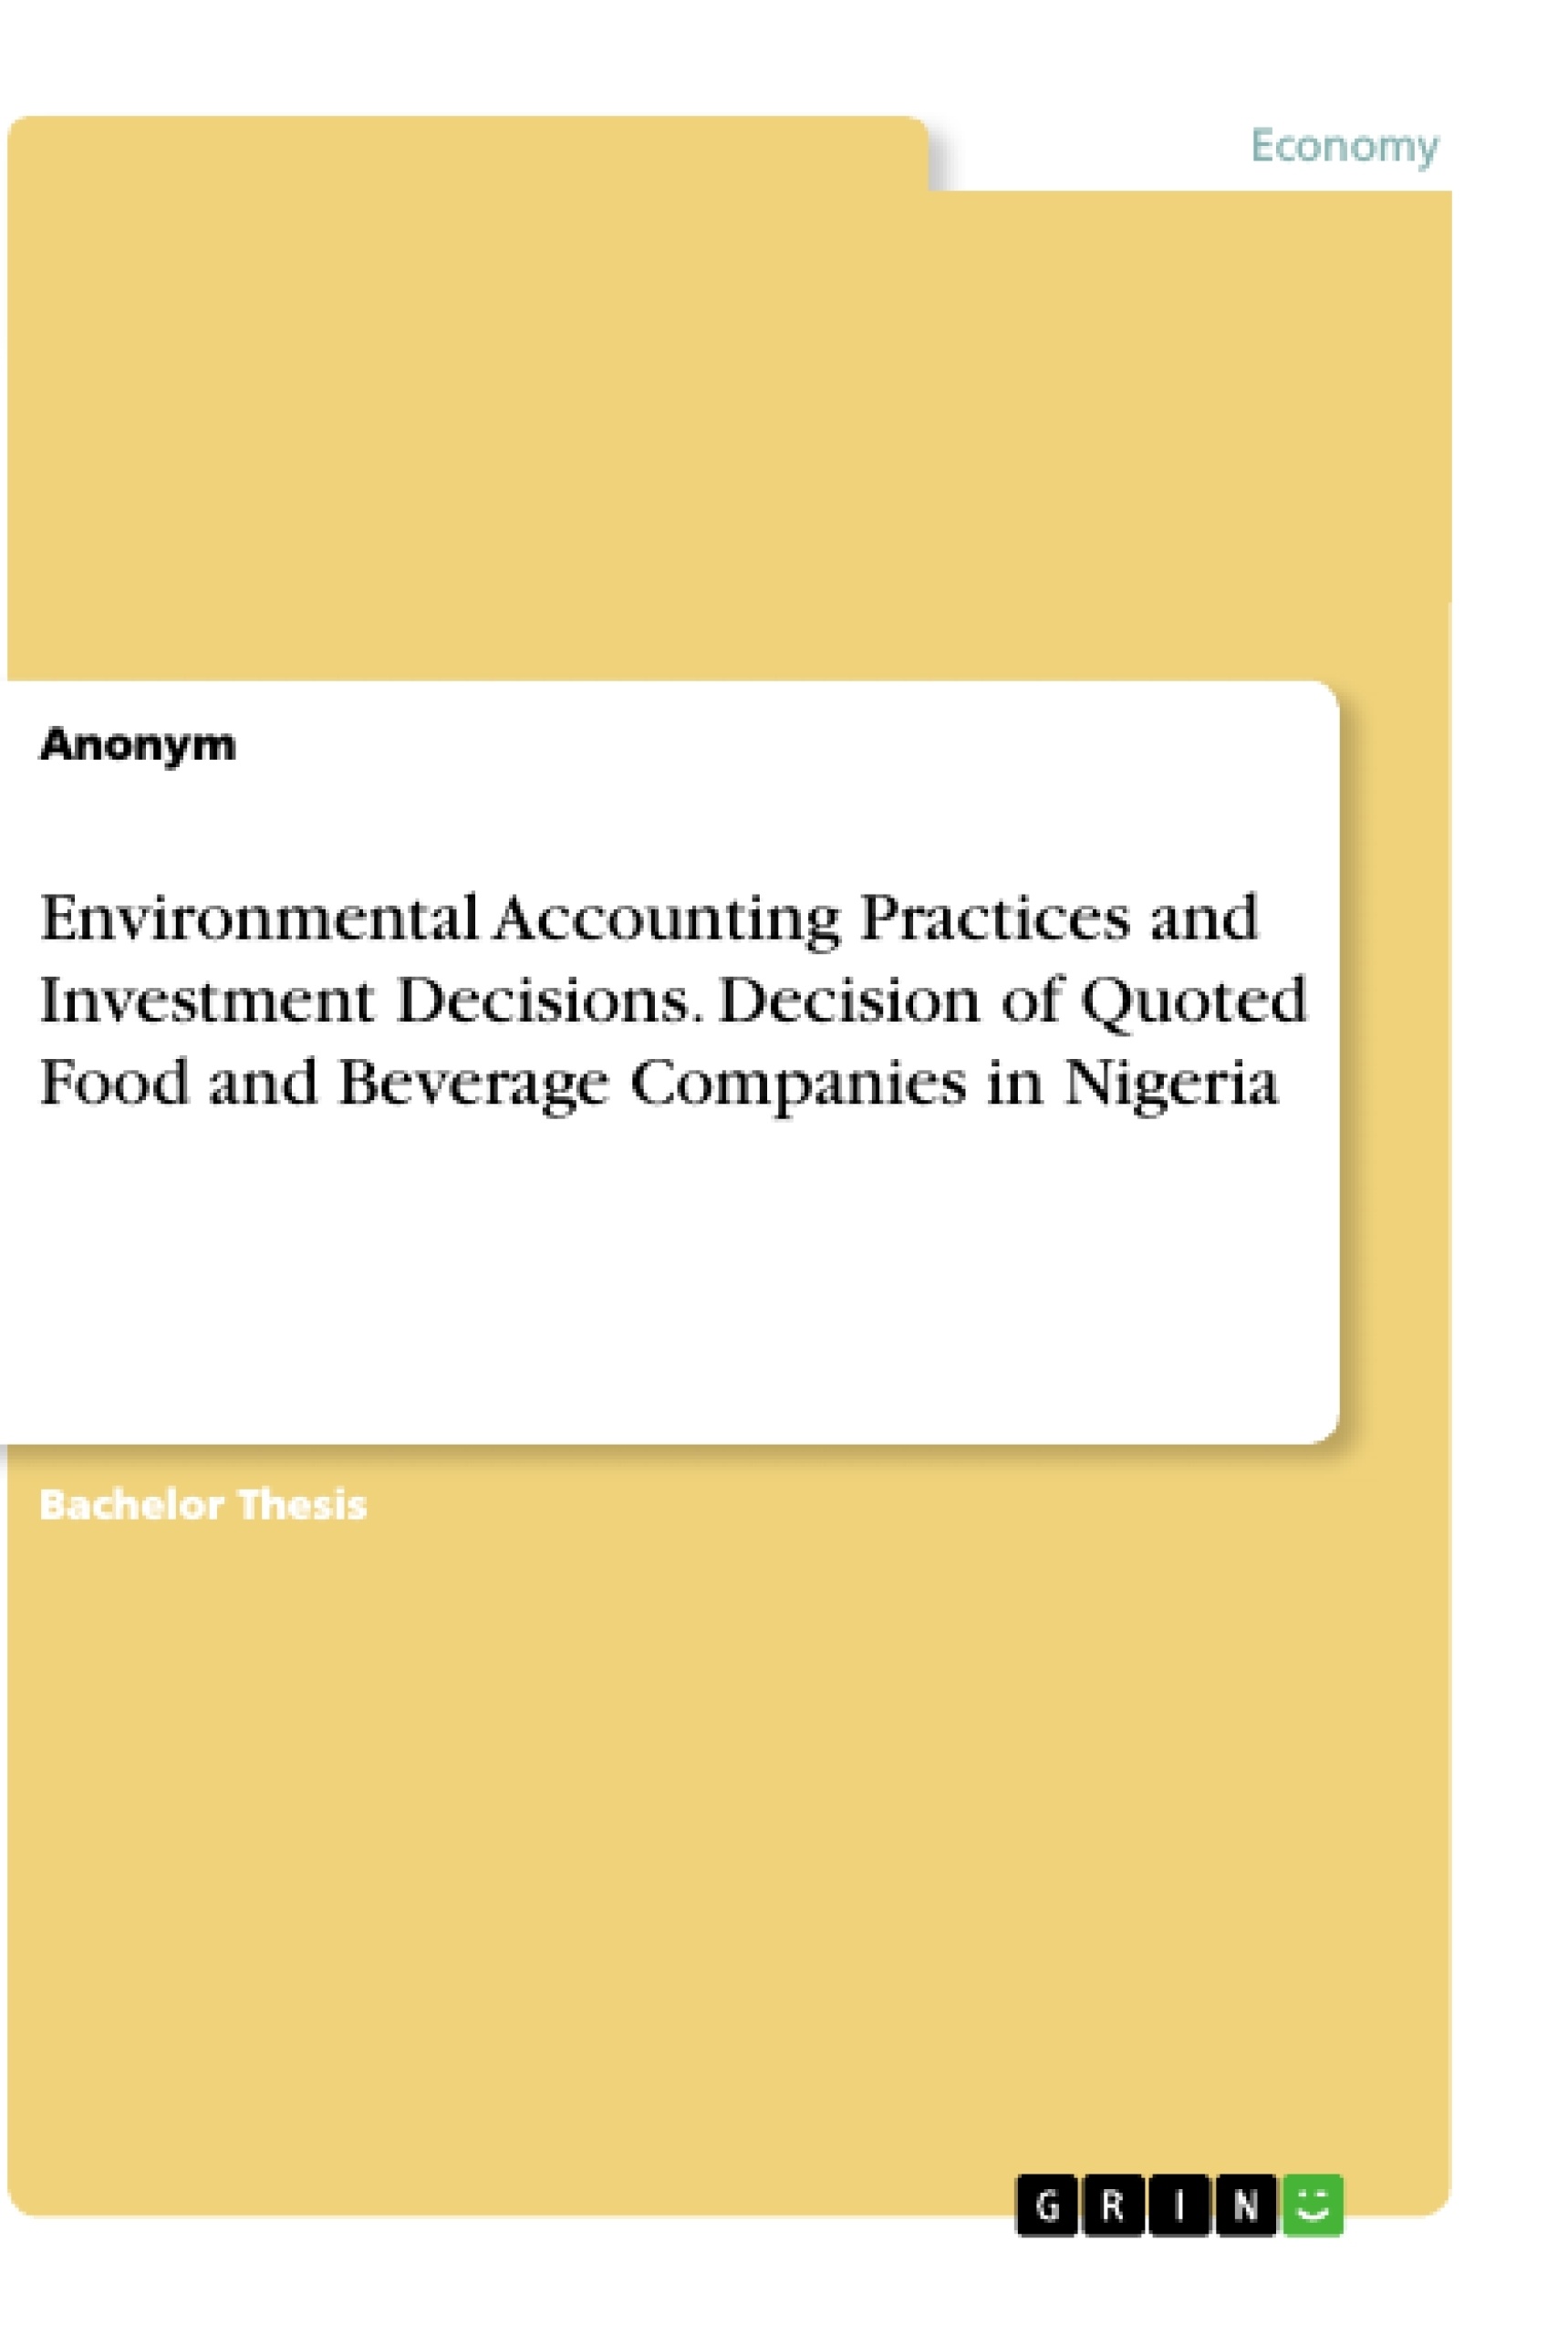 Title: Environmental Accounting Practices and Investment Decisions. Decision of Quoted Food and Beverage Companies in Nigeria